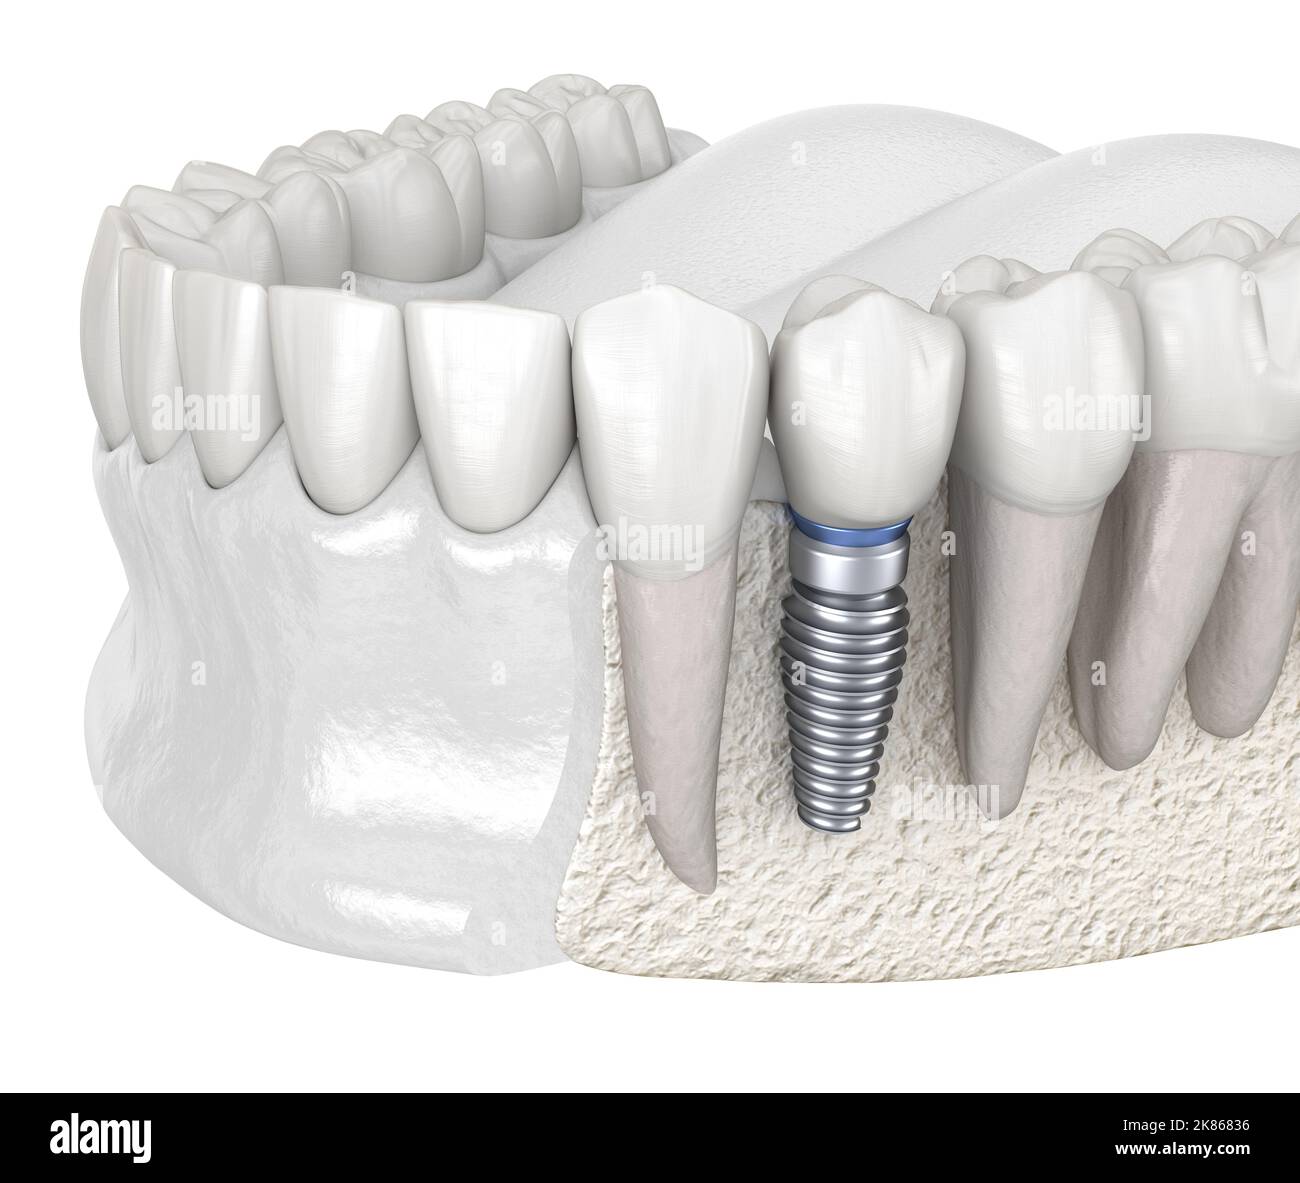 Premolar tooth recovery with implant. Medically accurate 3D illustration of human teeth and dentures concept Stock Photo